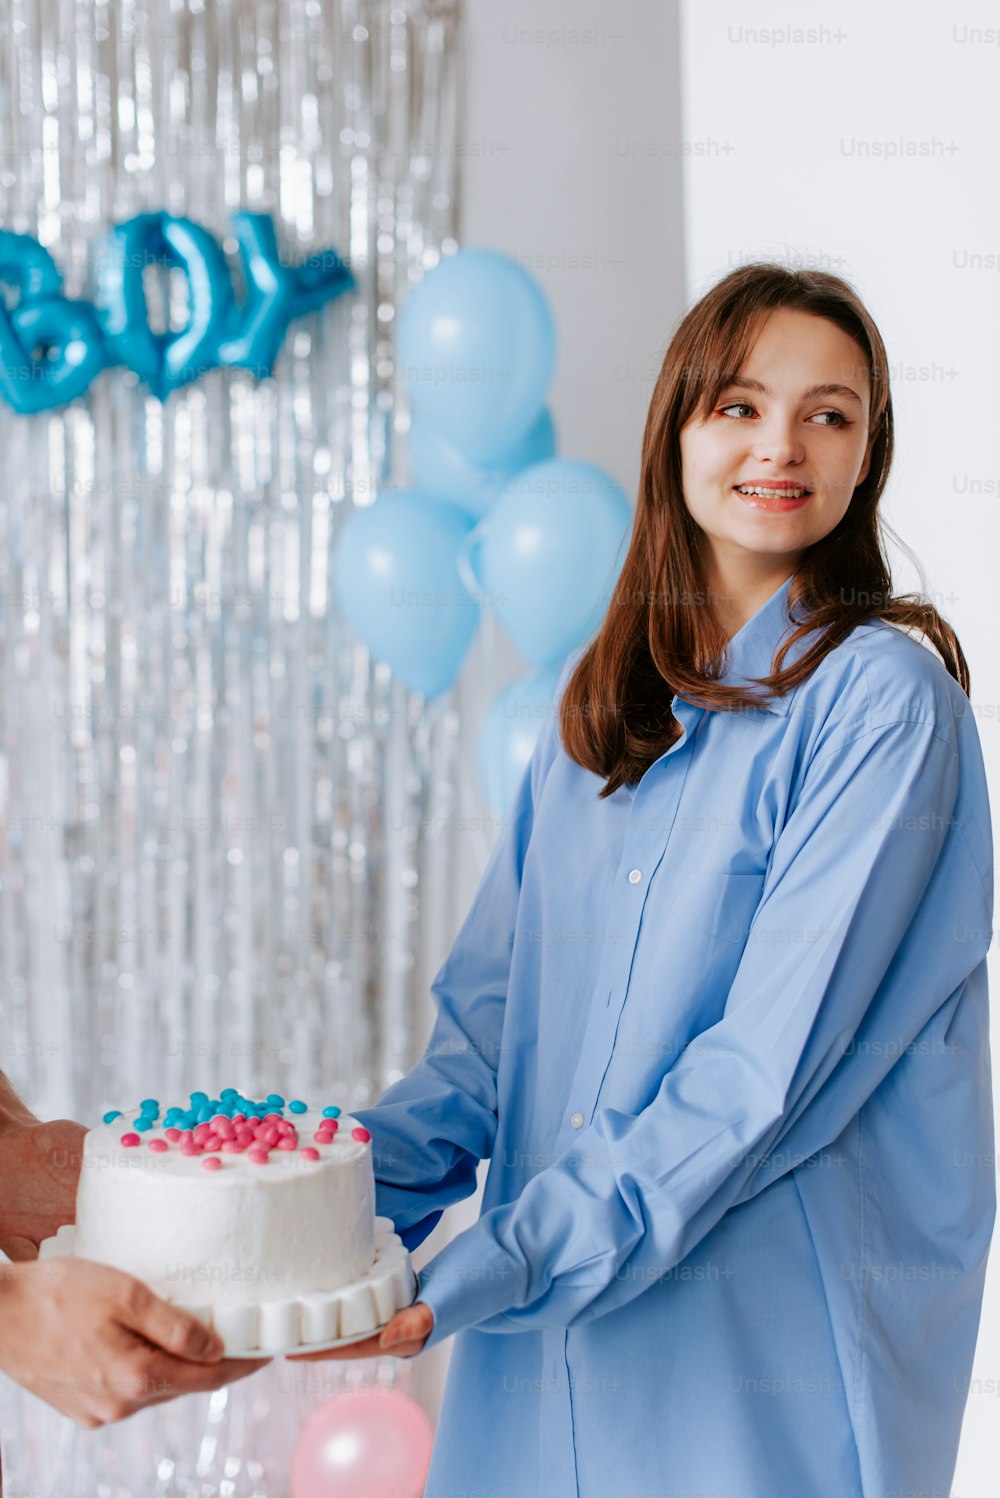 a woman standing next to a man holding a cake